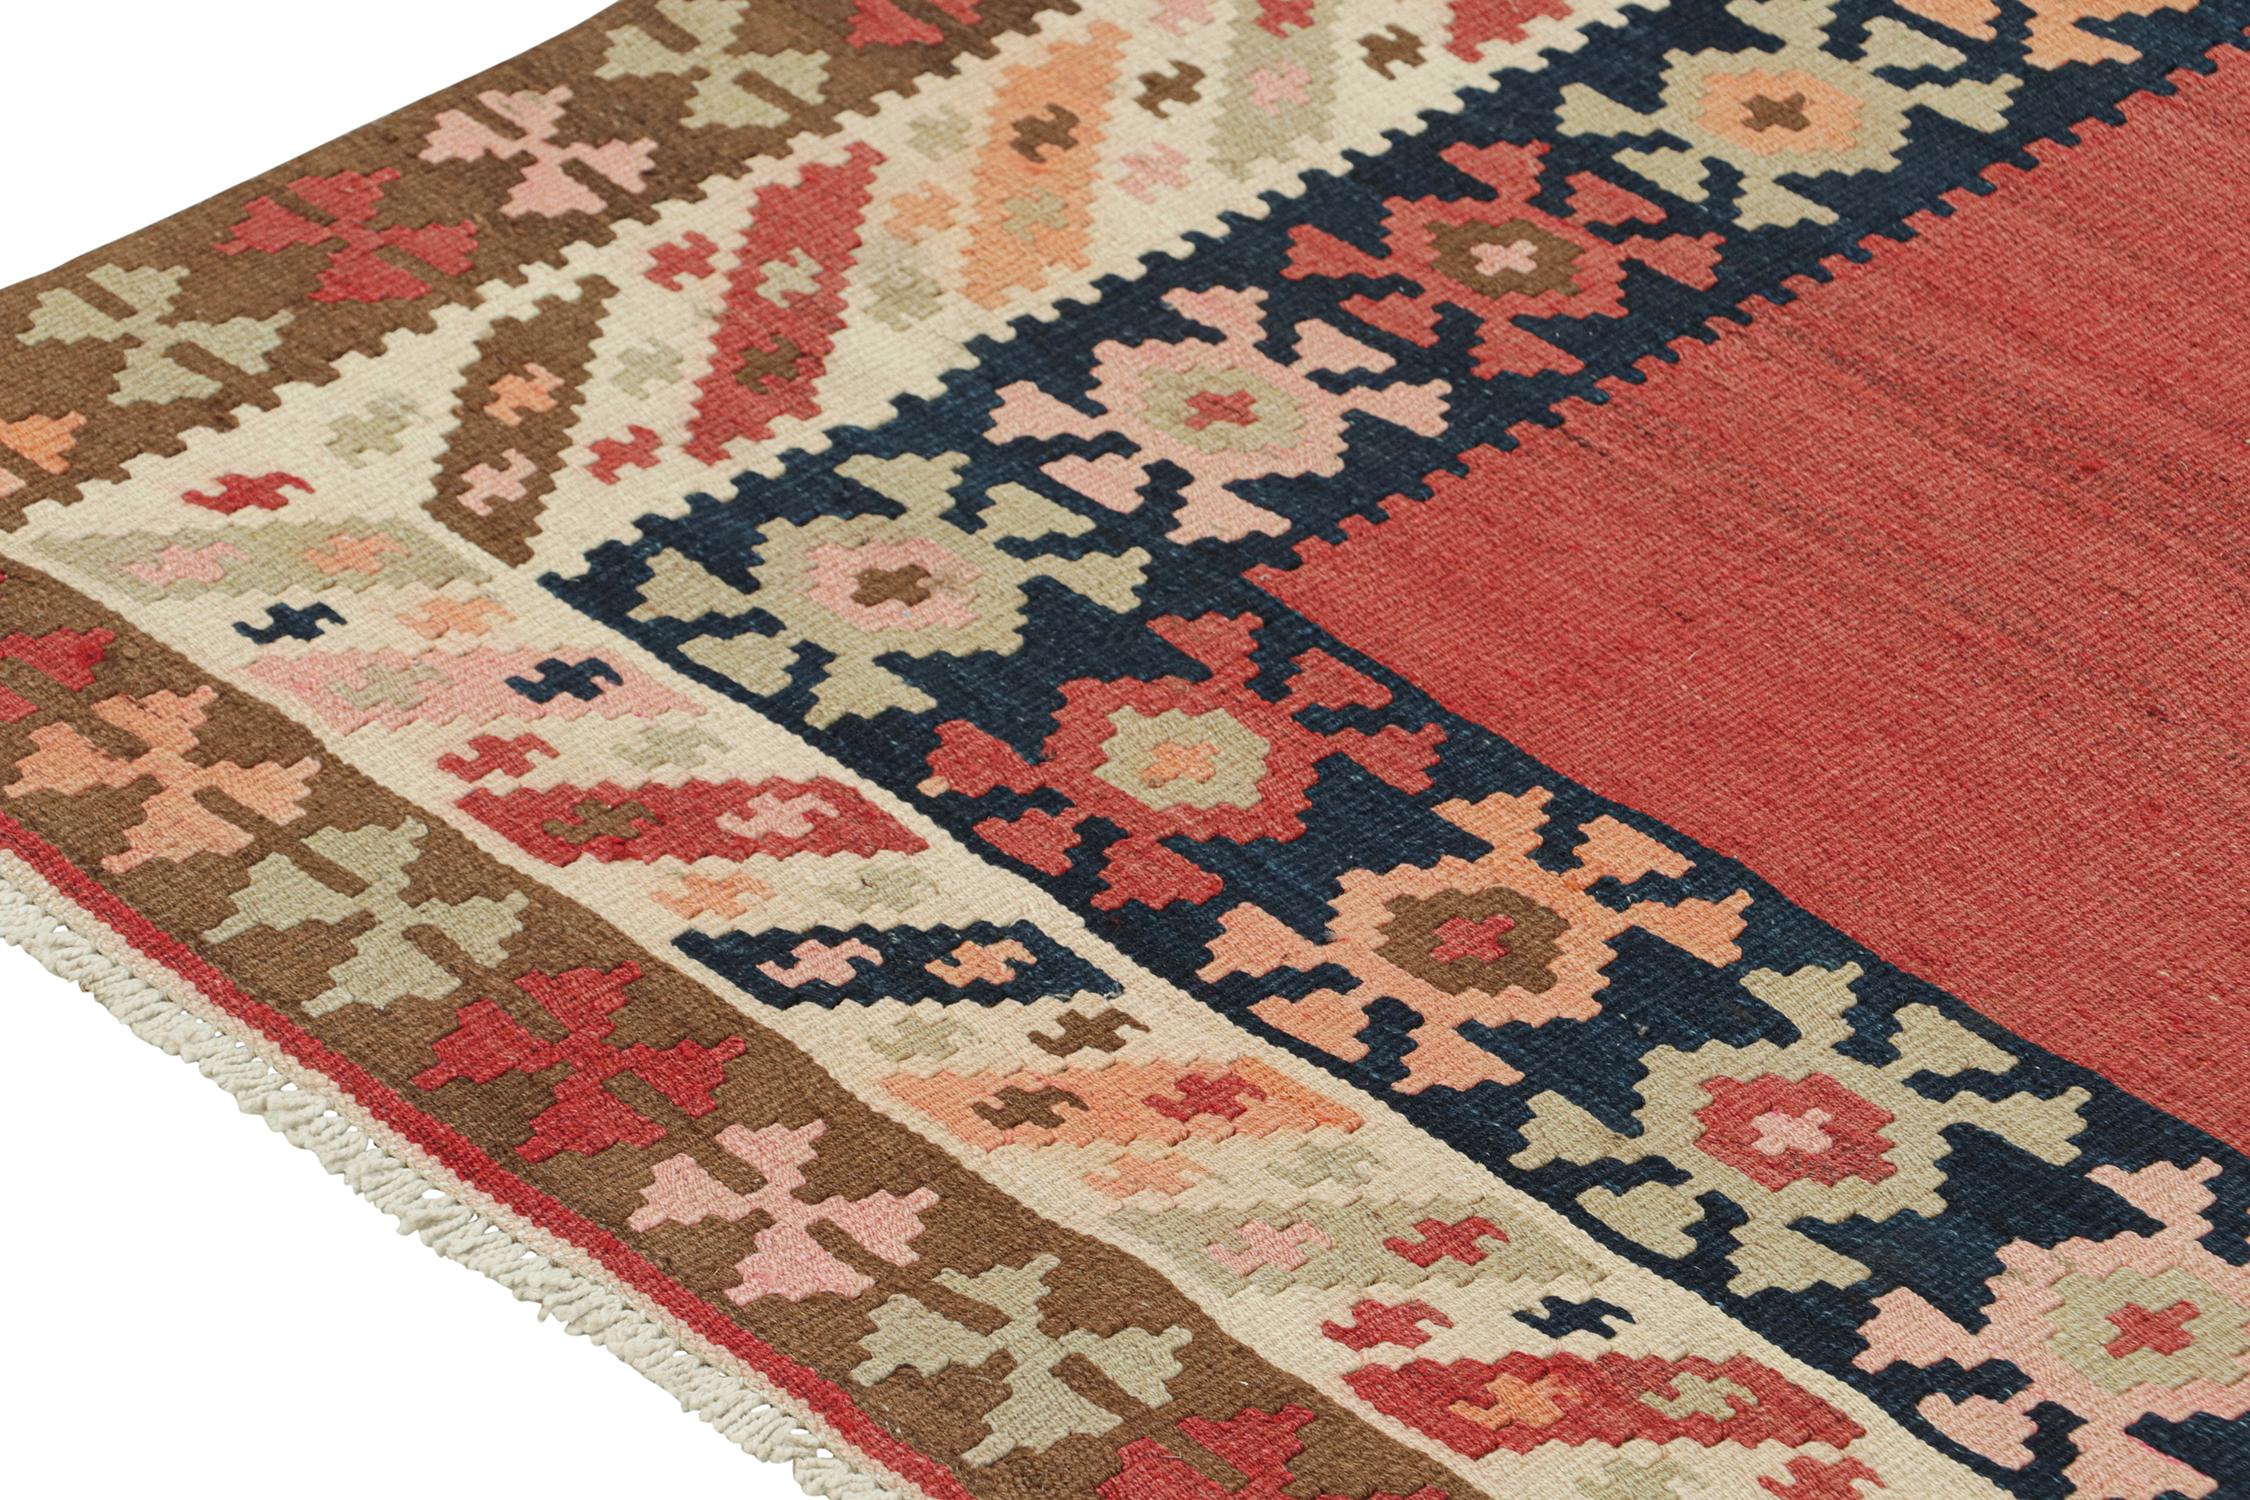 Vintage Shahsavan Persian Kilim in Red with Blue Medallion by Rug & Kilim In Good Condition For Sale In Long Island City, NY